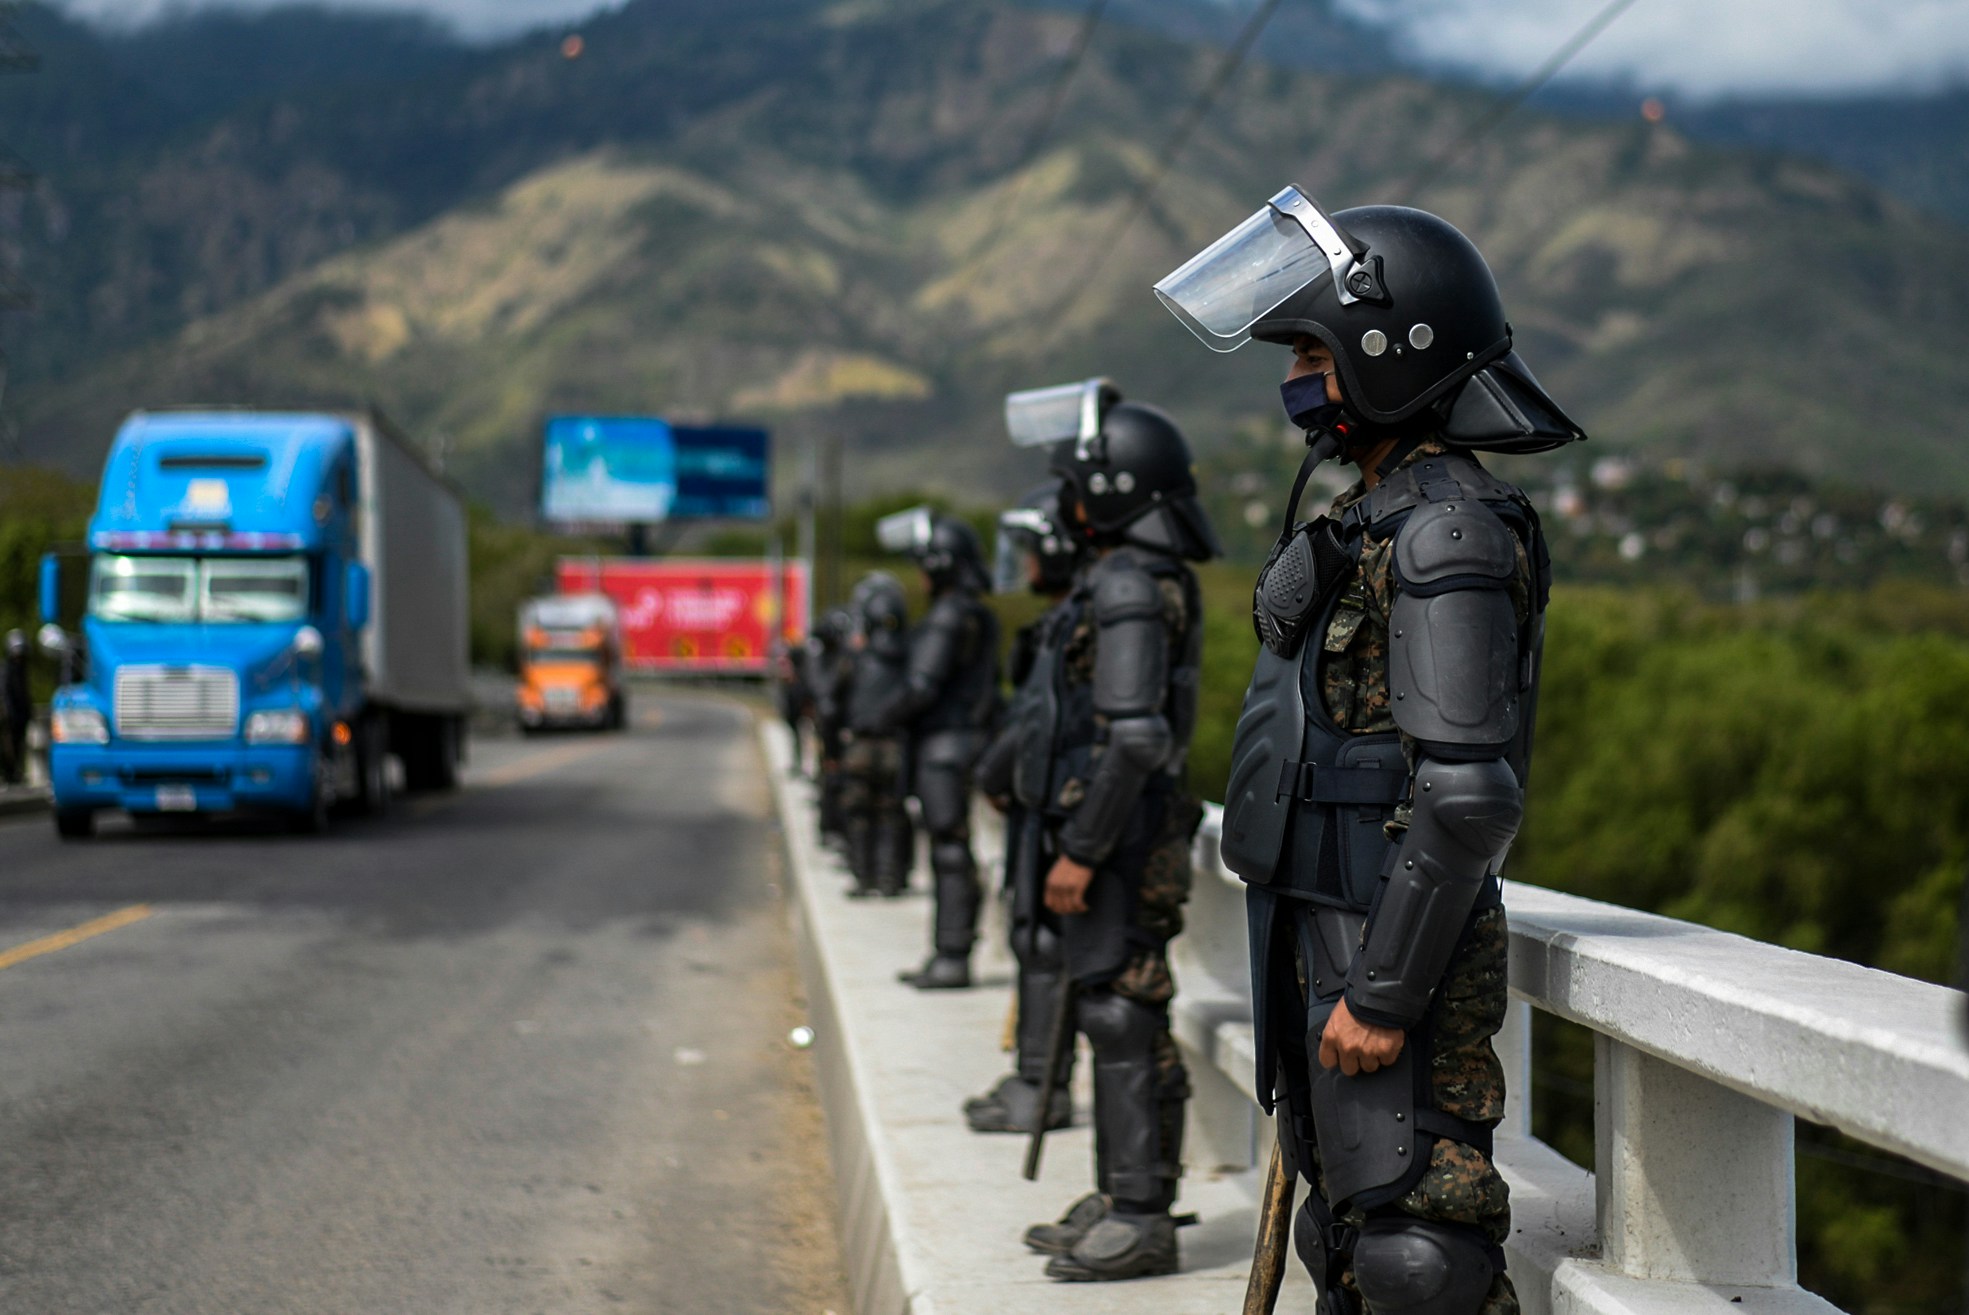 Members Guatemalan Army stand guard at a bridge in Zacapa, Guatemala on January 19, 2021. - On buses and trucks, Guatemala transported Tuesday several groups of migrants who were part of a US-bound caravan back to Honduras, after police and military officers forced them to desist from the crossing. (Photo by Johan ORDONEZ / AFP) (Photo by JOHAN ORDONEZ/AFP via Getty Images)